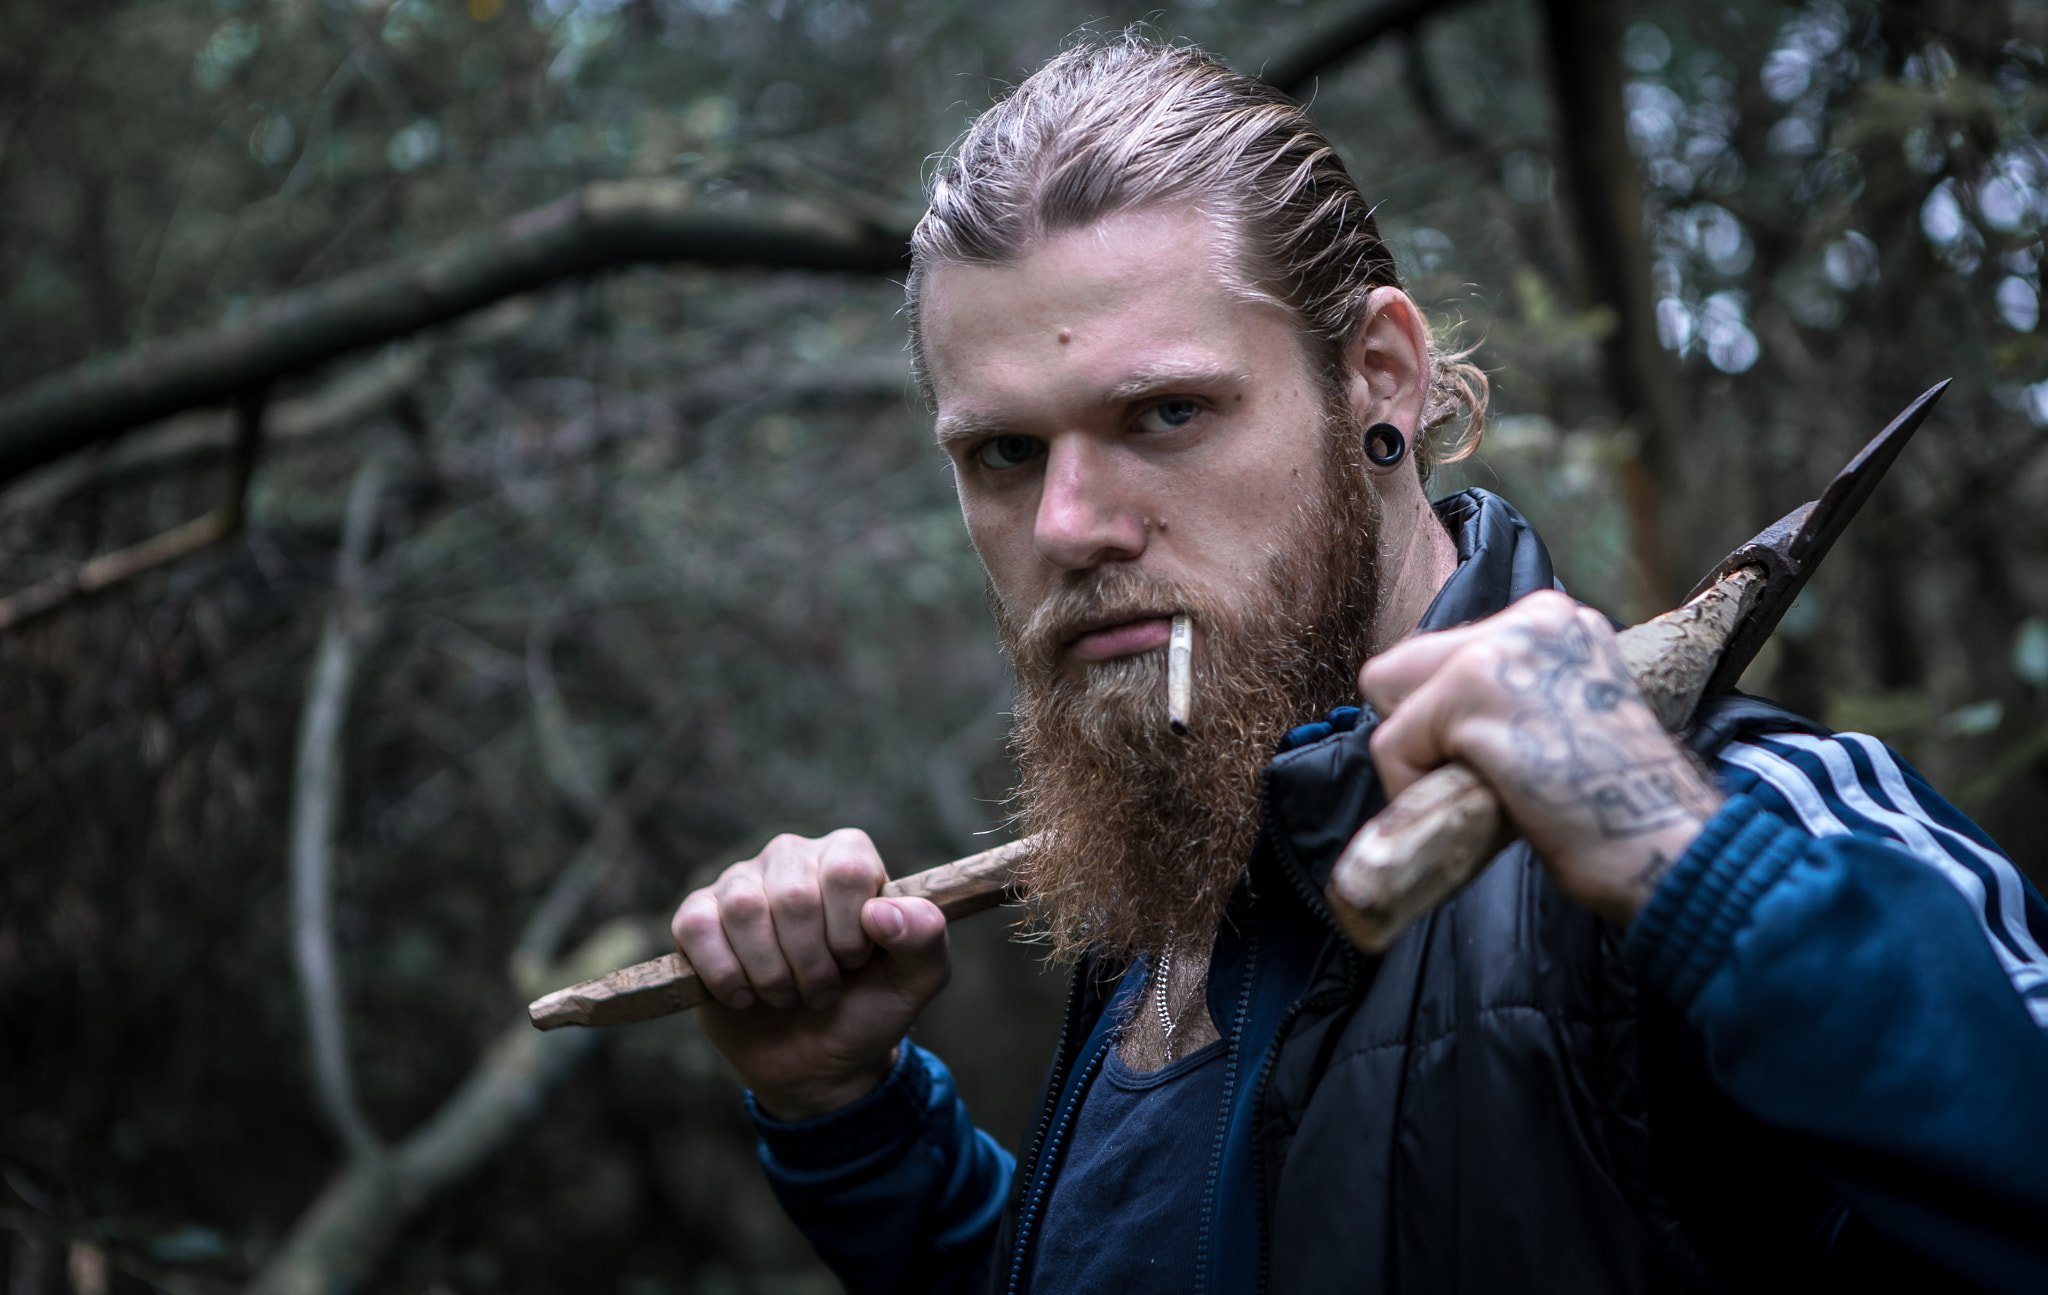 Sony a7S sample photo. Karmo kaputto, the man from the woods. photography